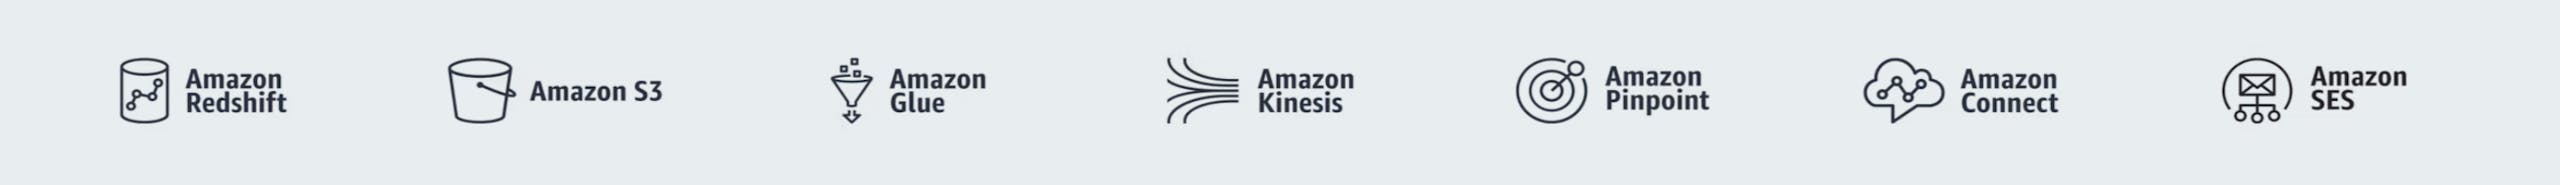 A line of various logos from Amazon, from Redshift to SES.